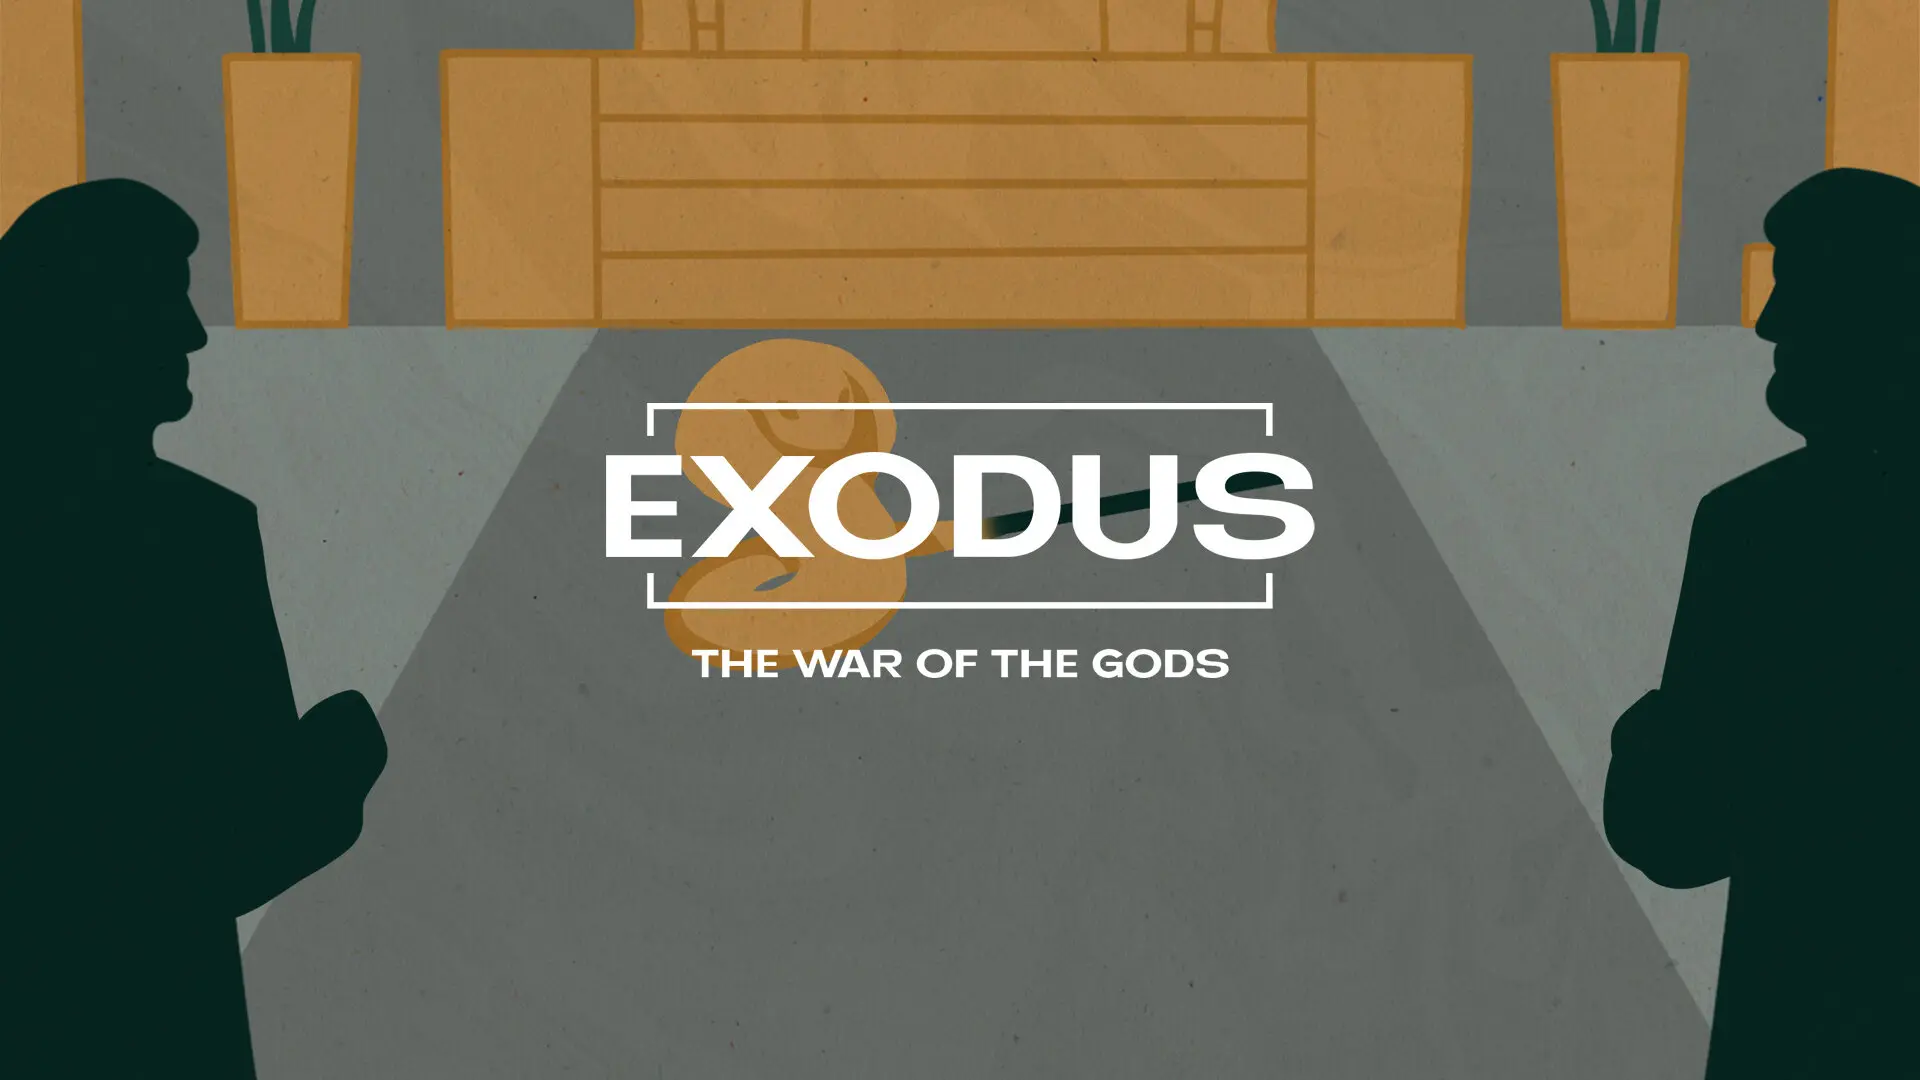 Exodus War Of The Gods Title Slide | Remix Church Media | Editable Design Templates And Resources Made For The Church.